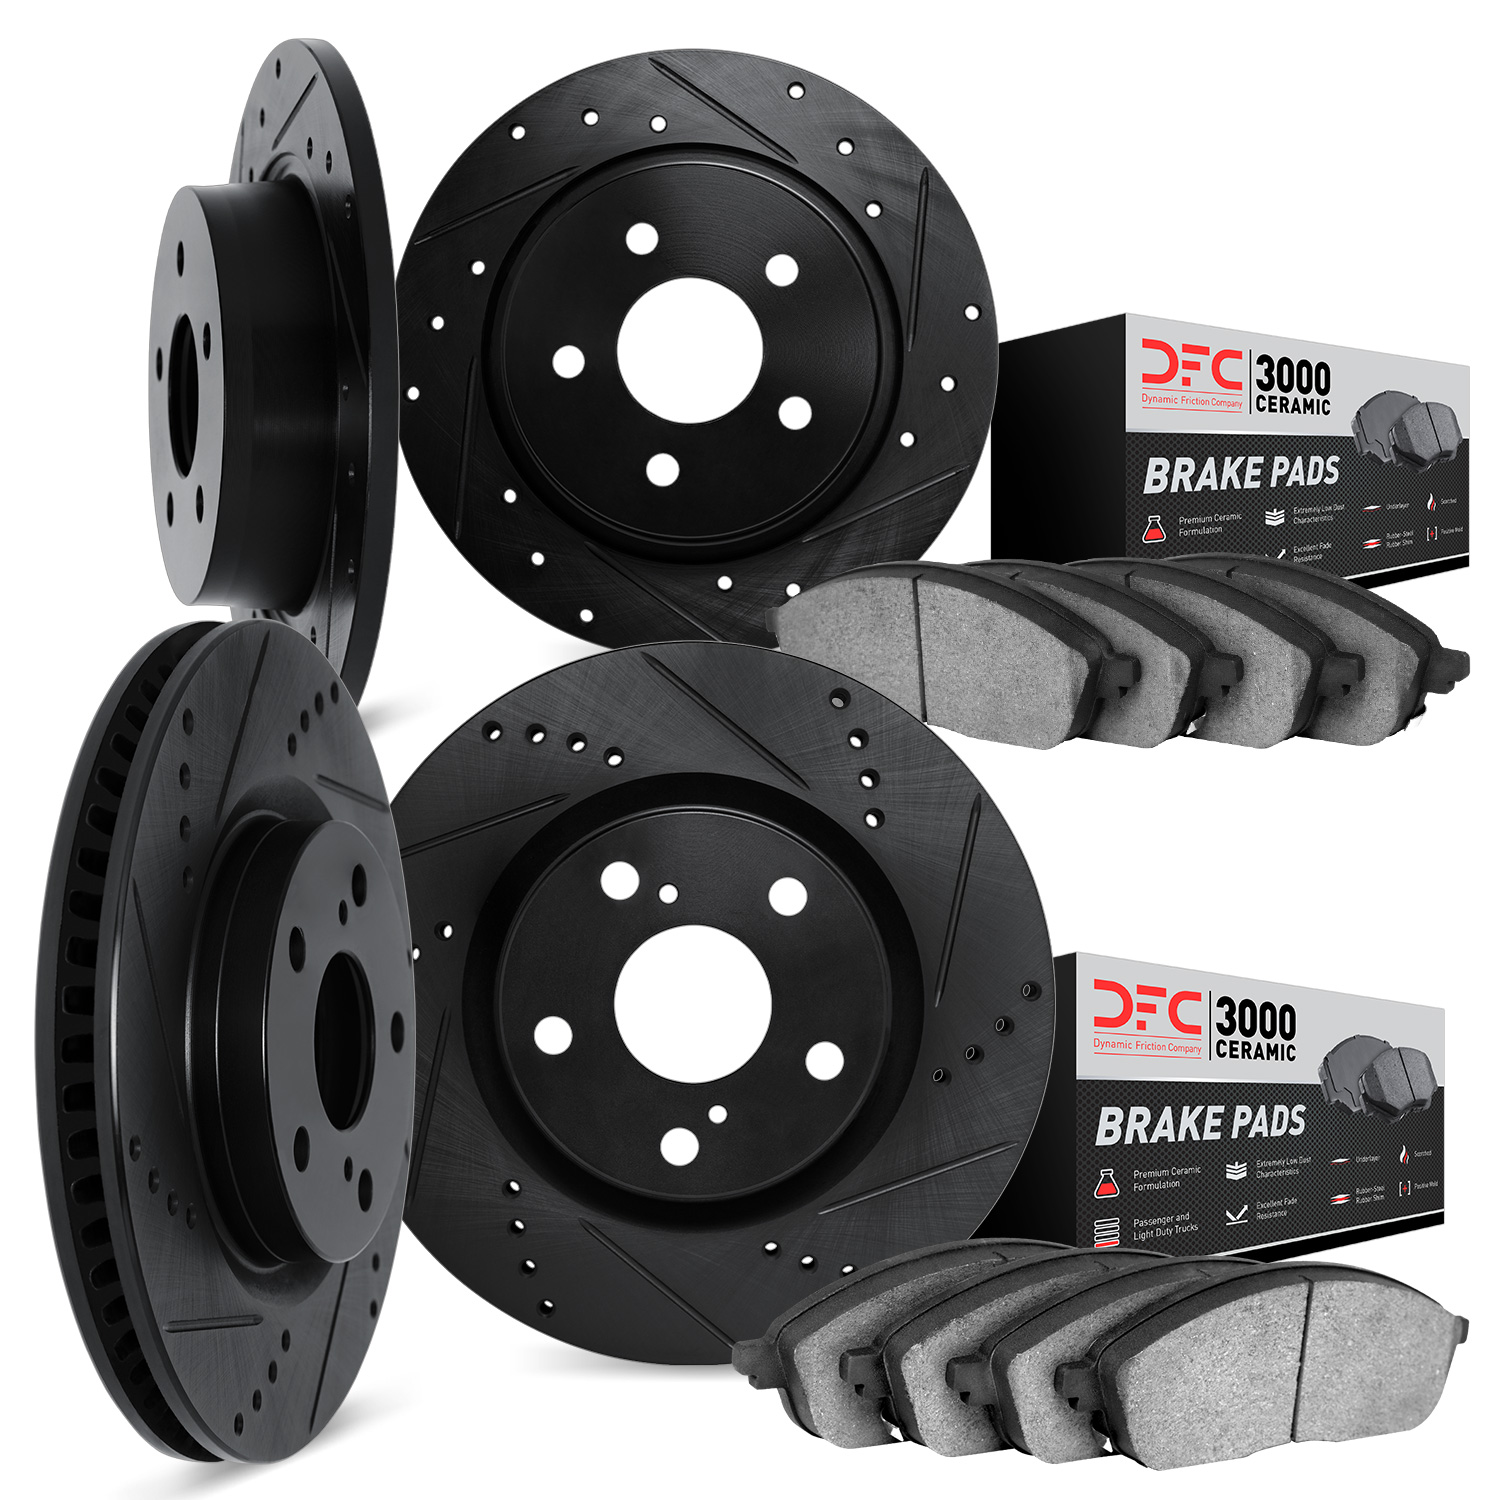 8304-13017 Drilled/Slotted Brake Rotors with 3000-Series Ceramic Brake Pads Kit [Black], 2002-2004 Subaru, Position: Front and R